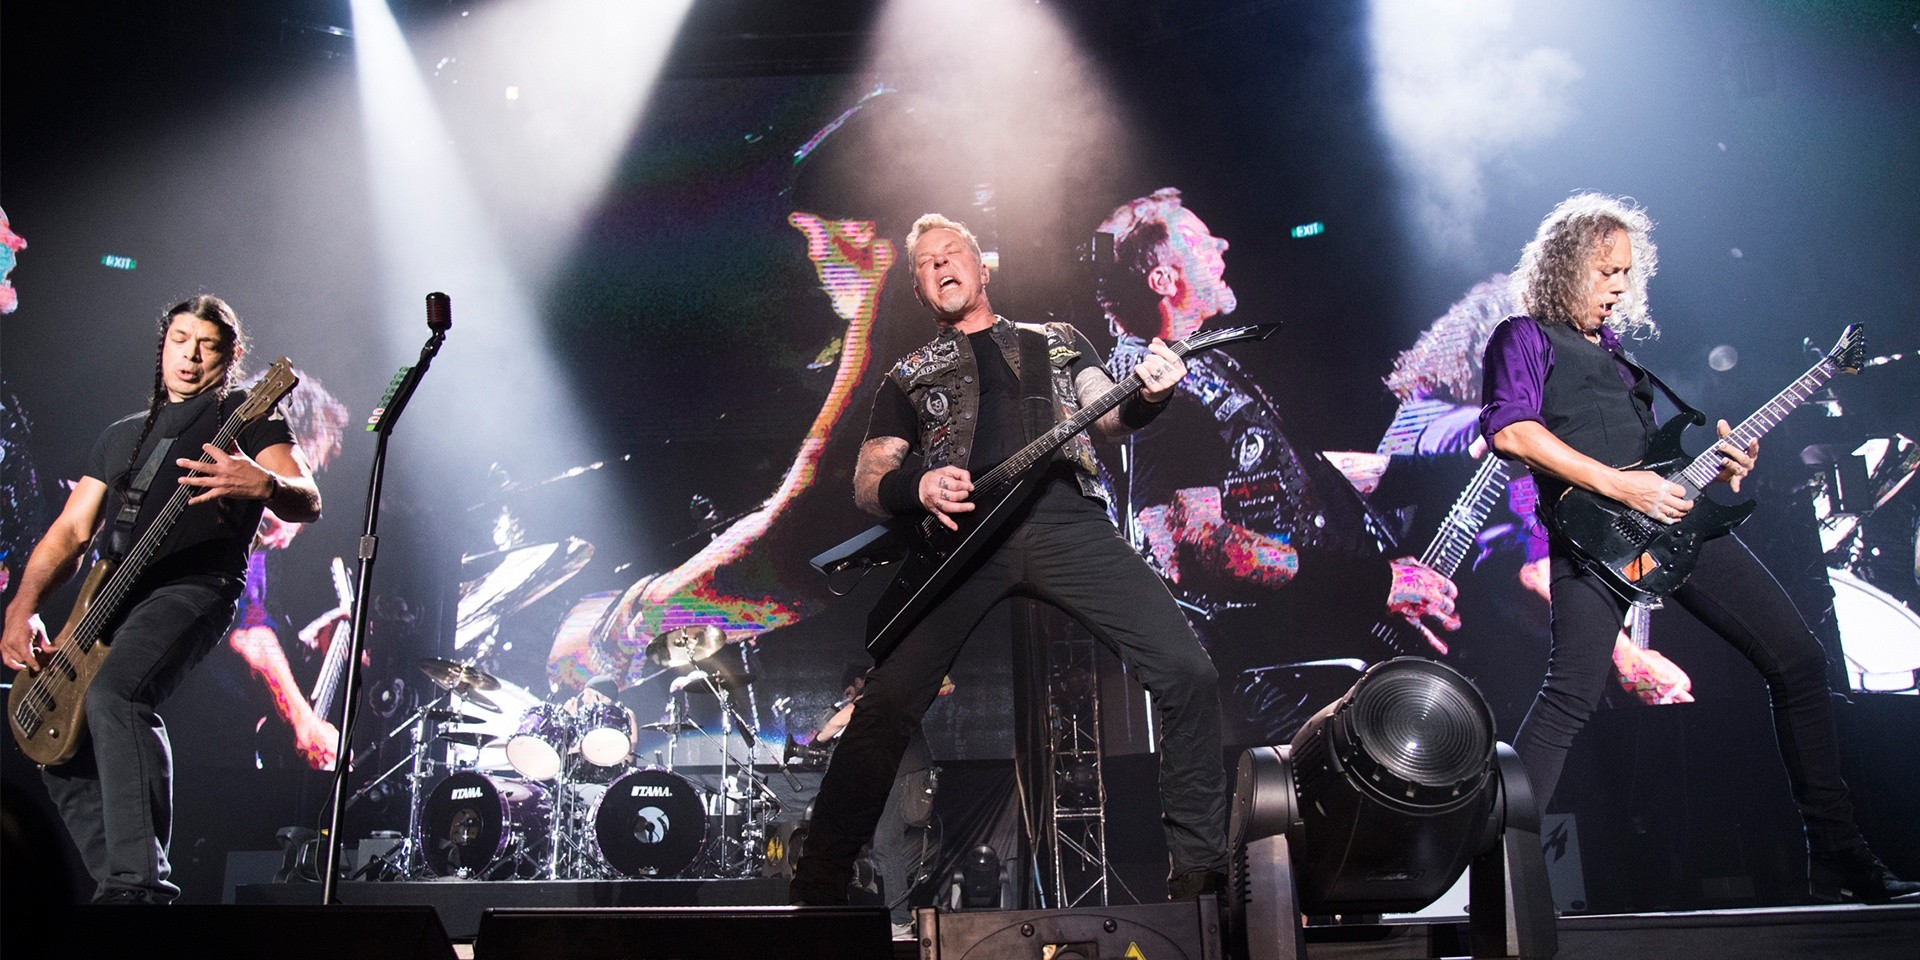 GIG REPORT: Metallica perform to 10,000 fans, return to Singapore Indoor Stadium after 24 years